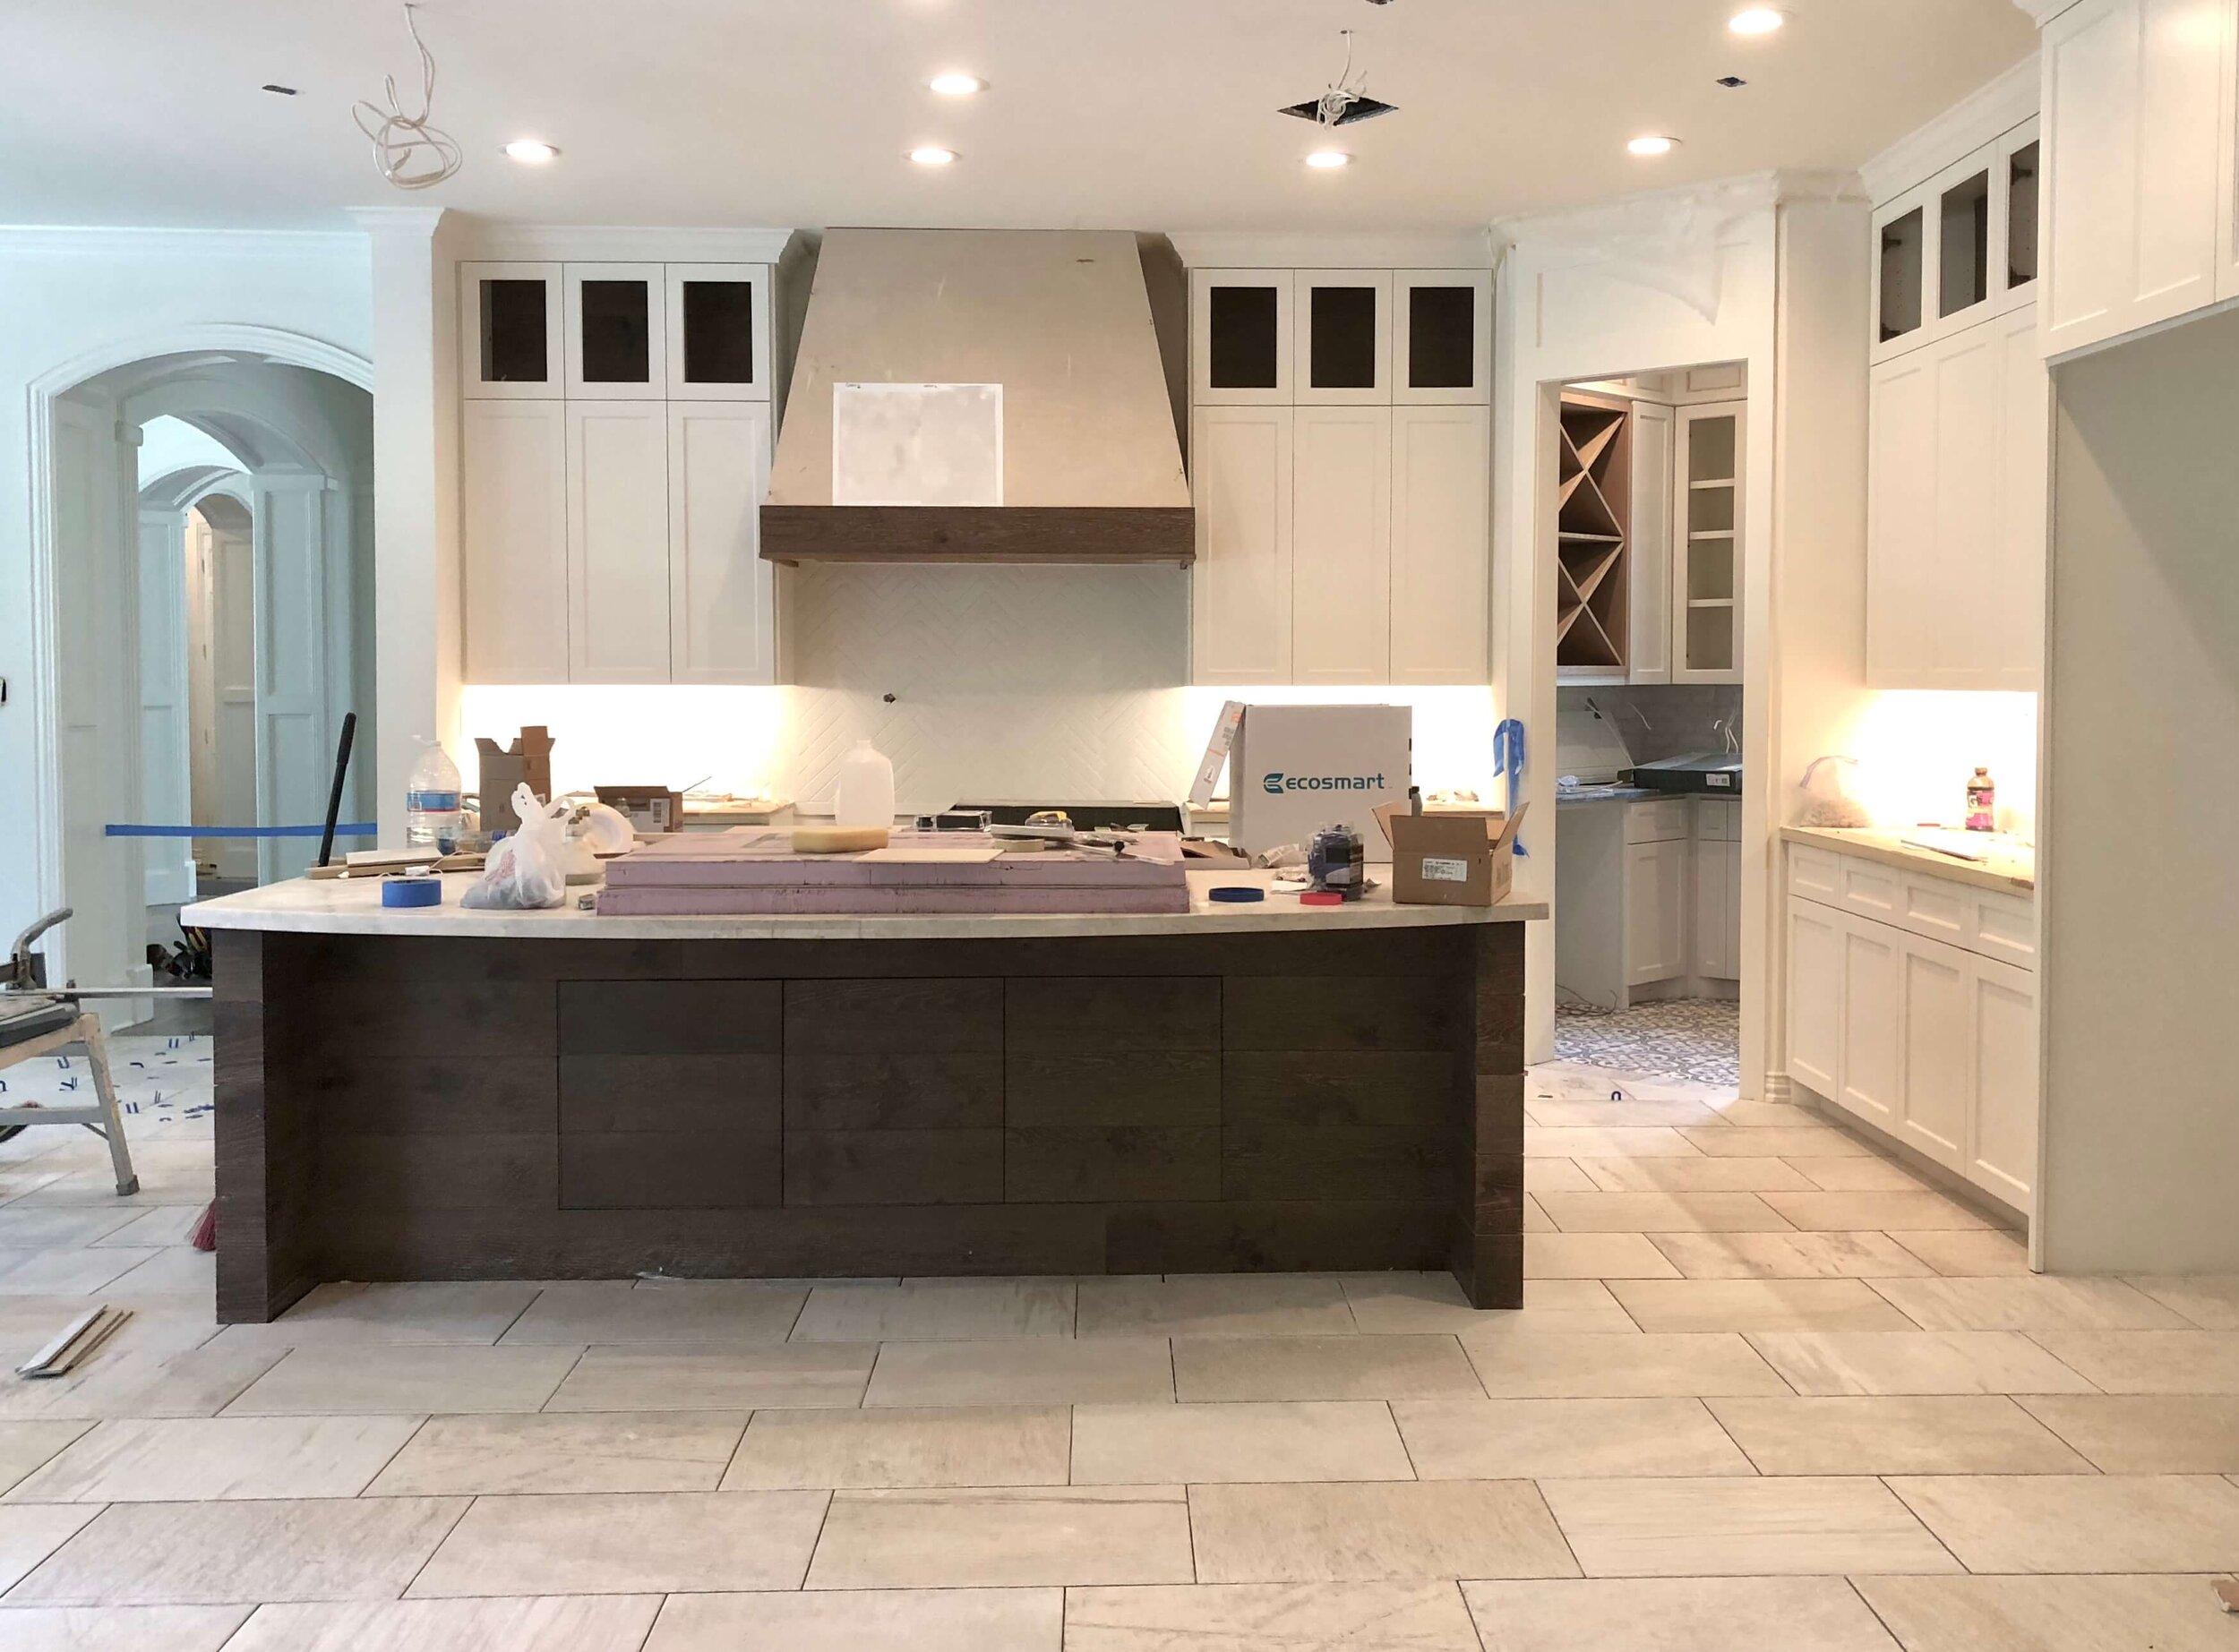 Which Direction Should You Run Your Tile Flooring? Well... — DESIGNED